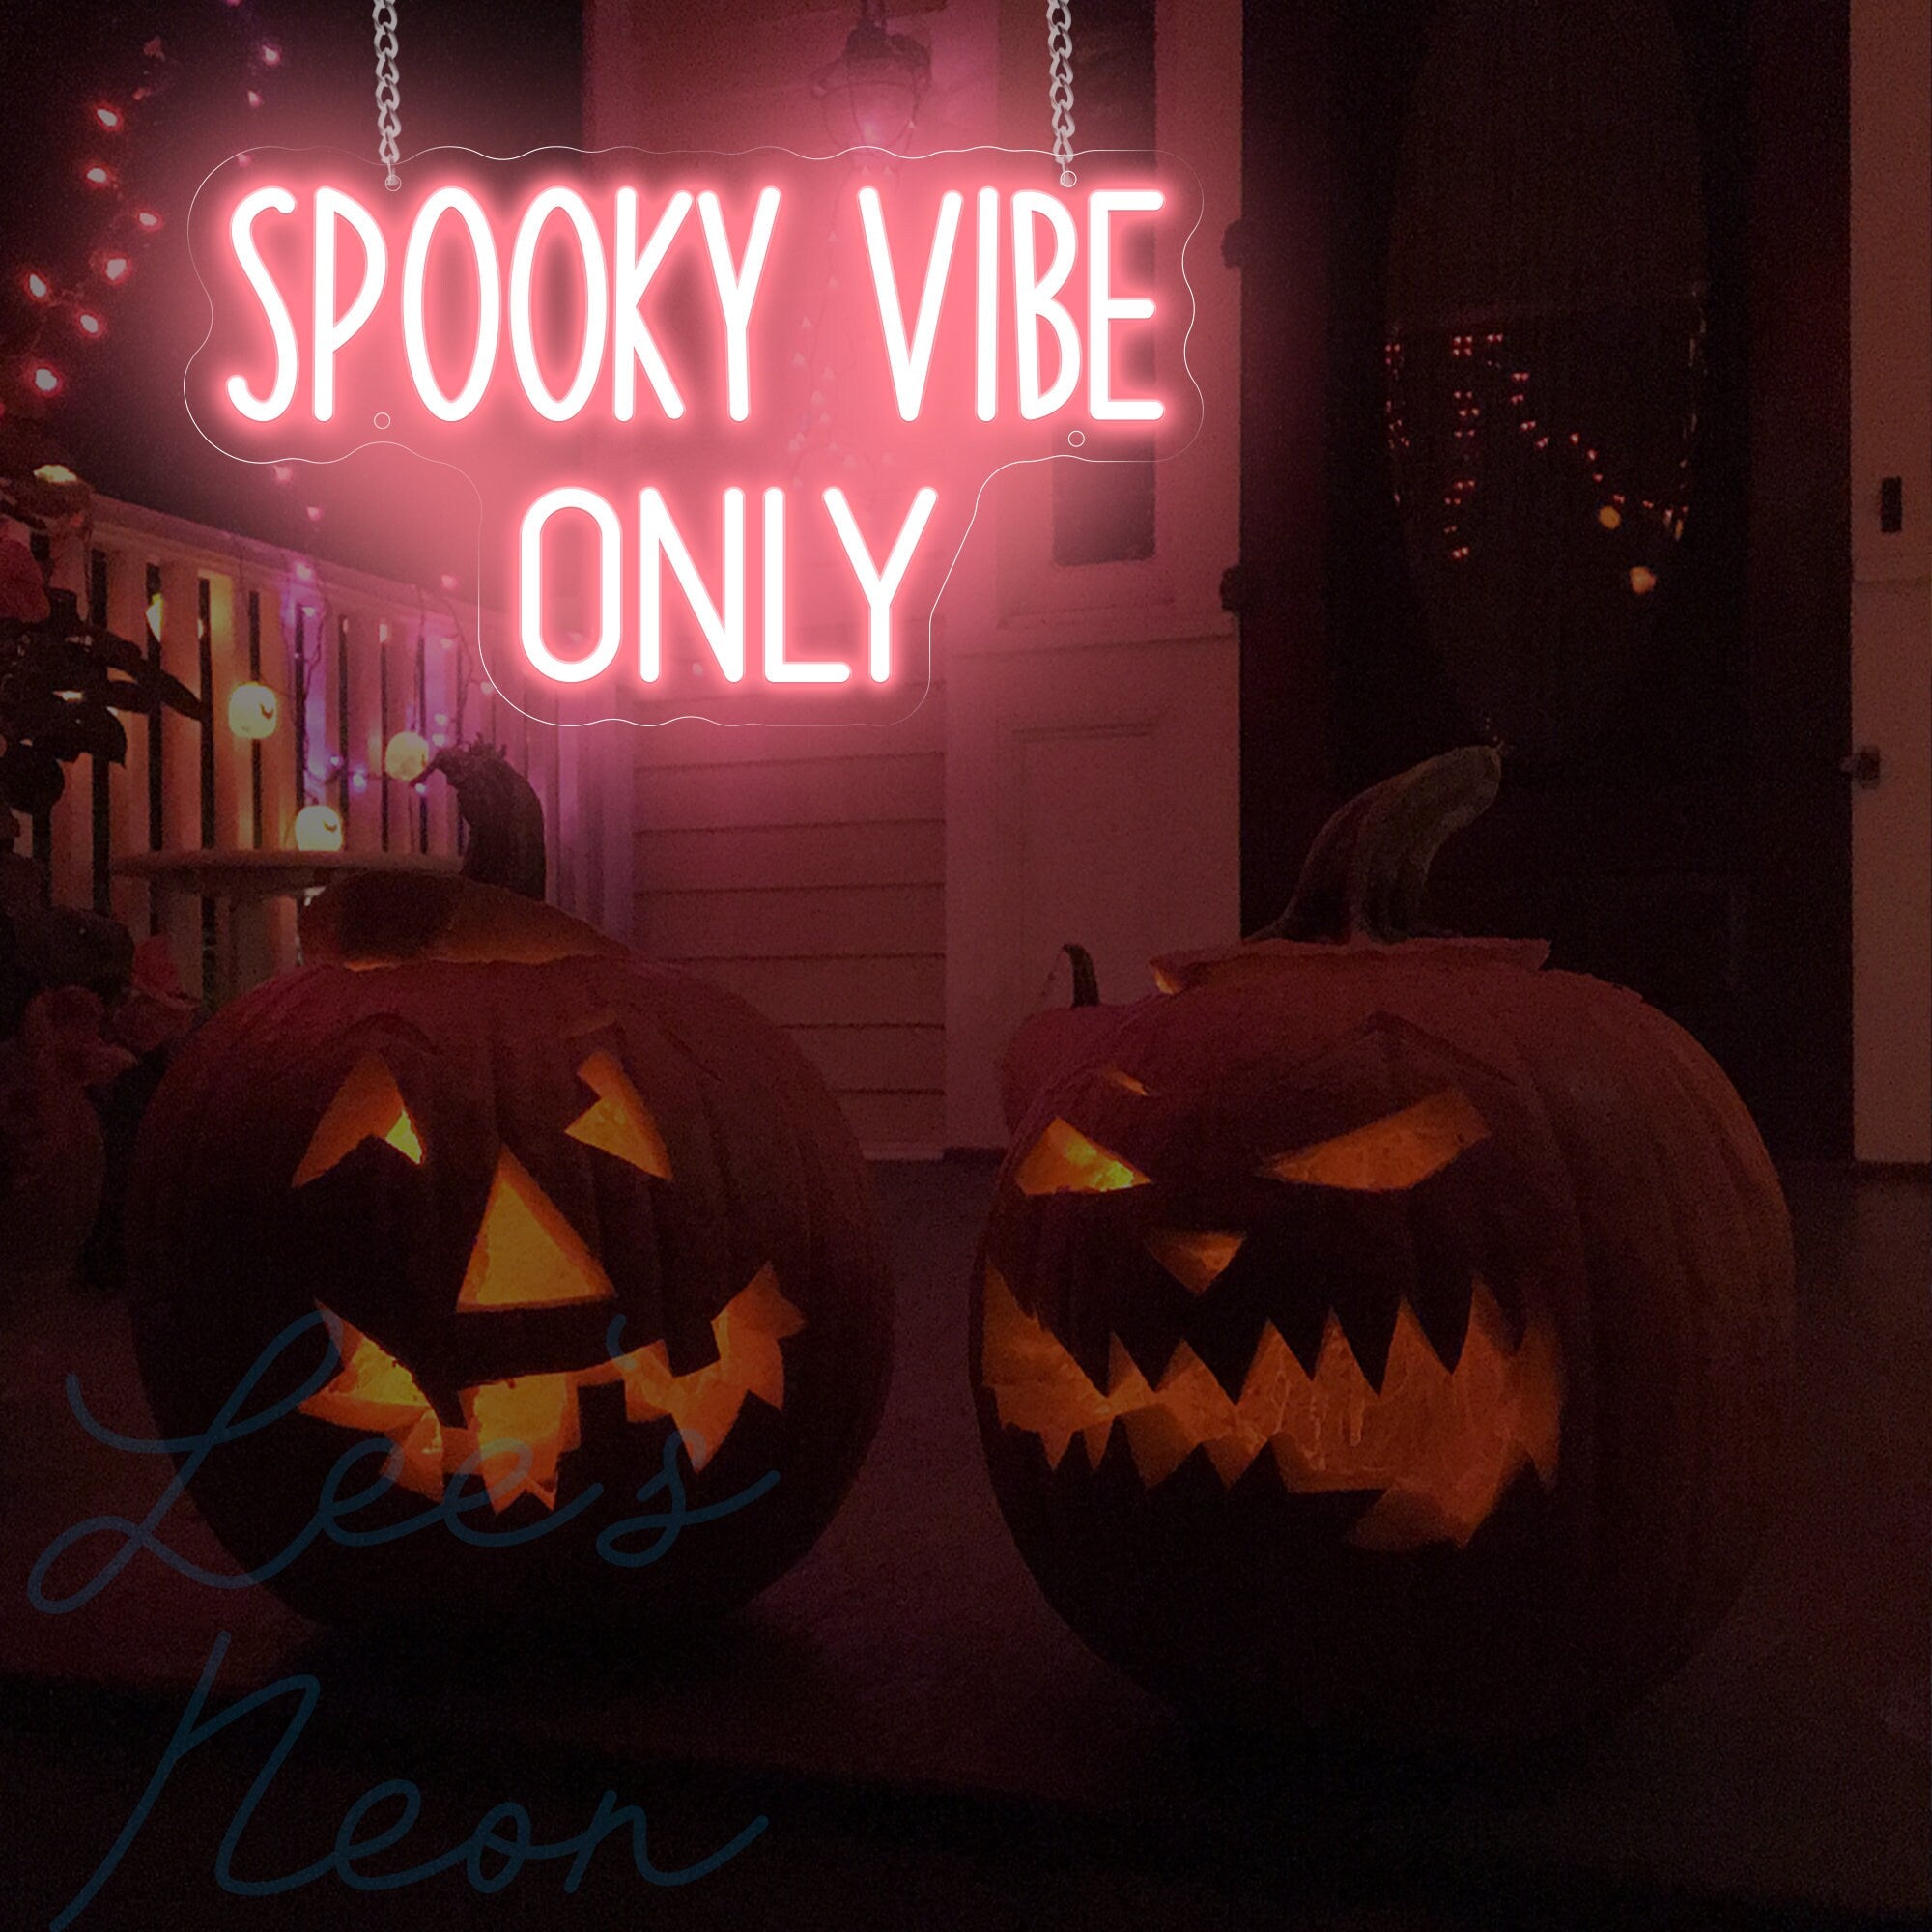 NEONIP-100% Handmade Spooky Vibe Only Neon Sign Halloween Event Light Up Sign Decor